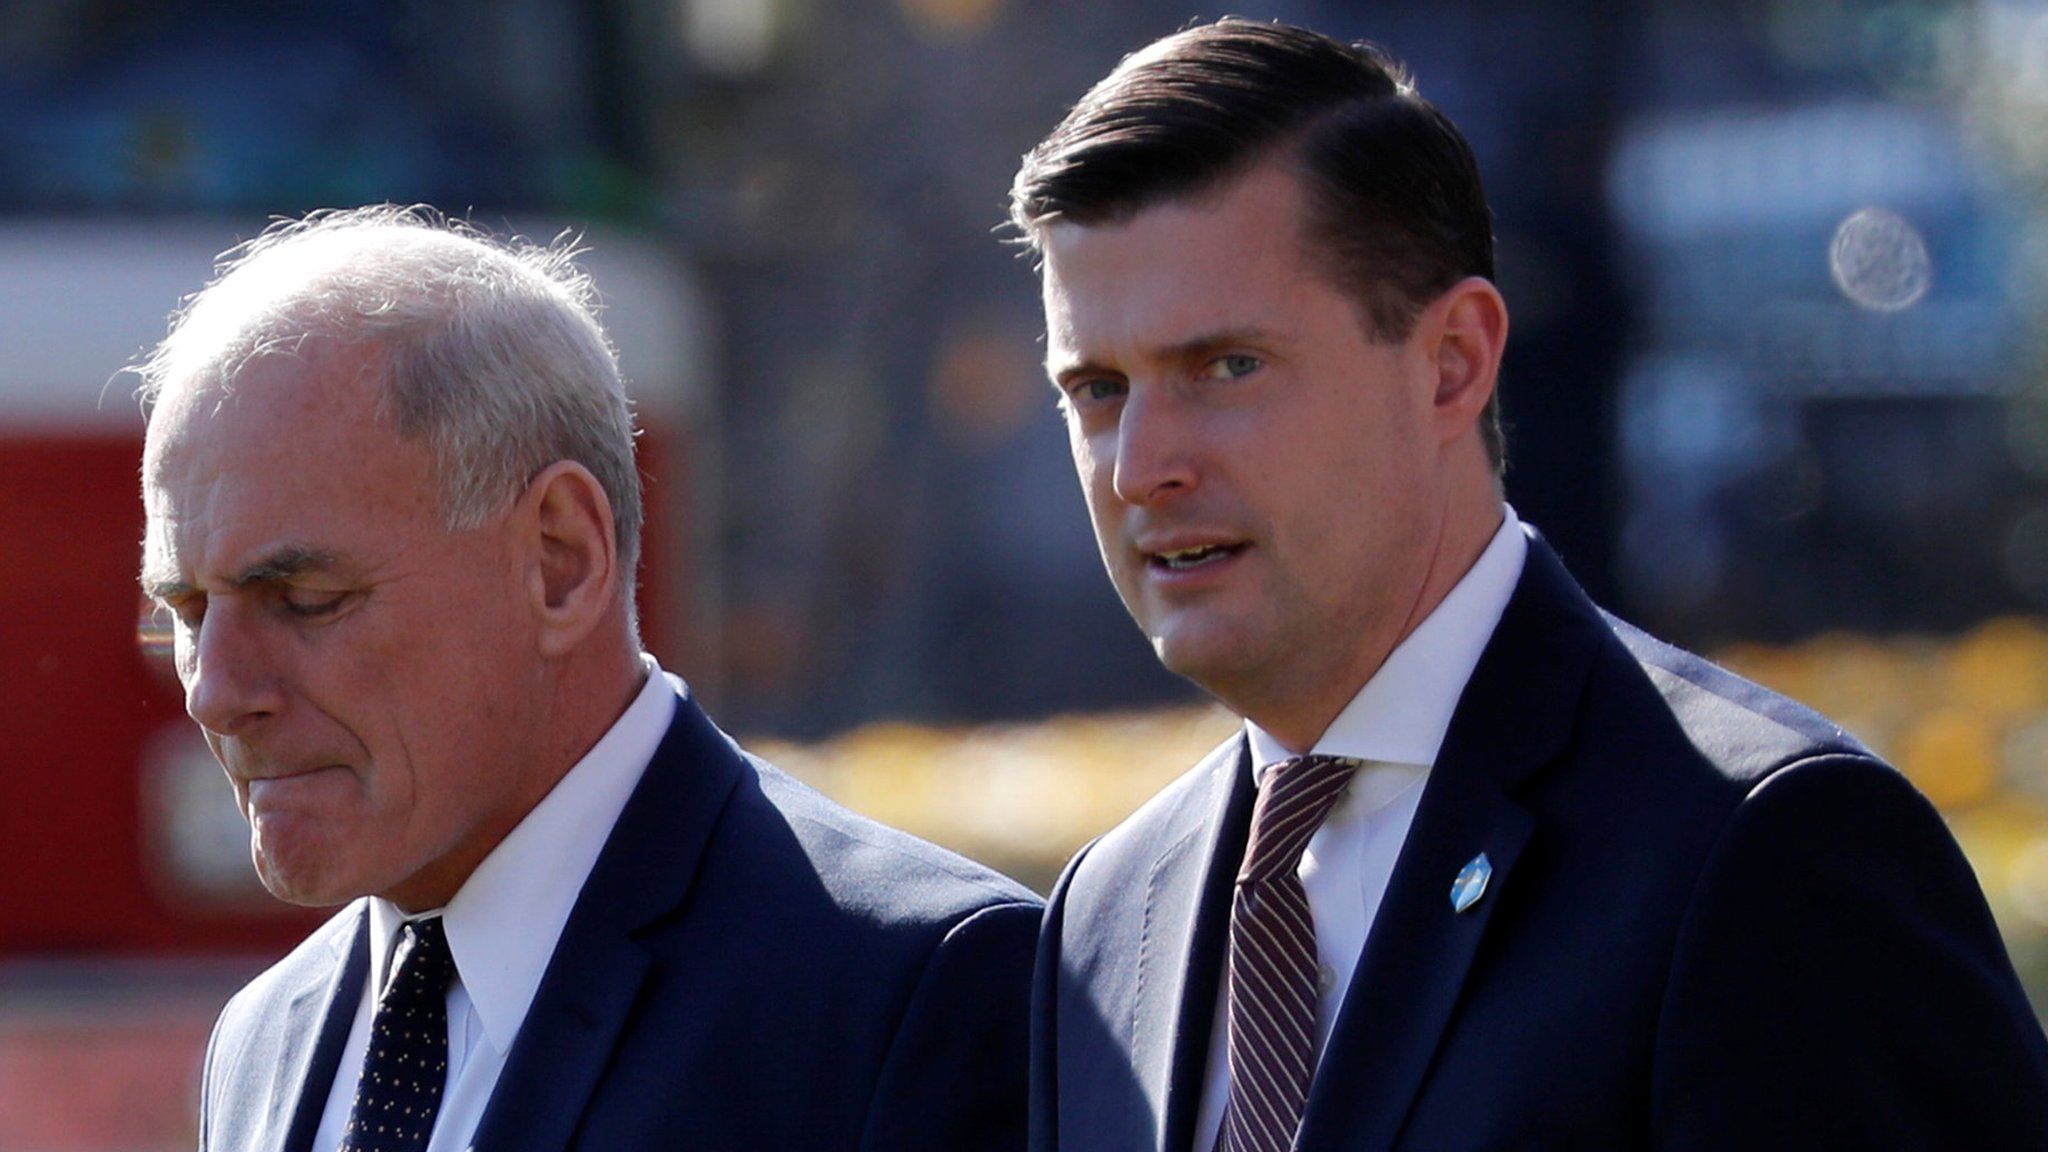 White House Chief of Staff John Kelly (L) and White House Staff Secretary Rob Porter in November 2017